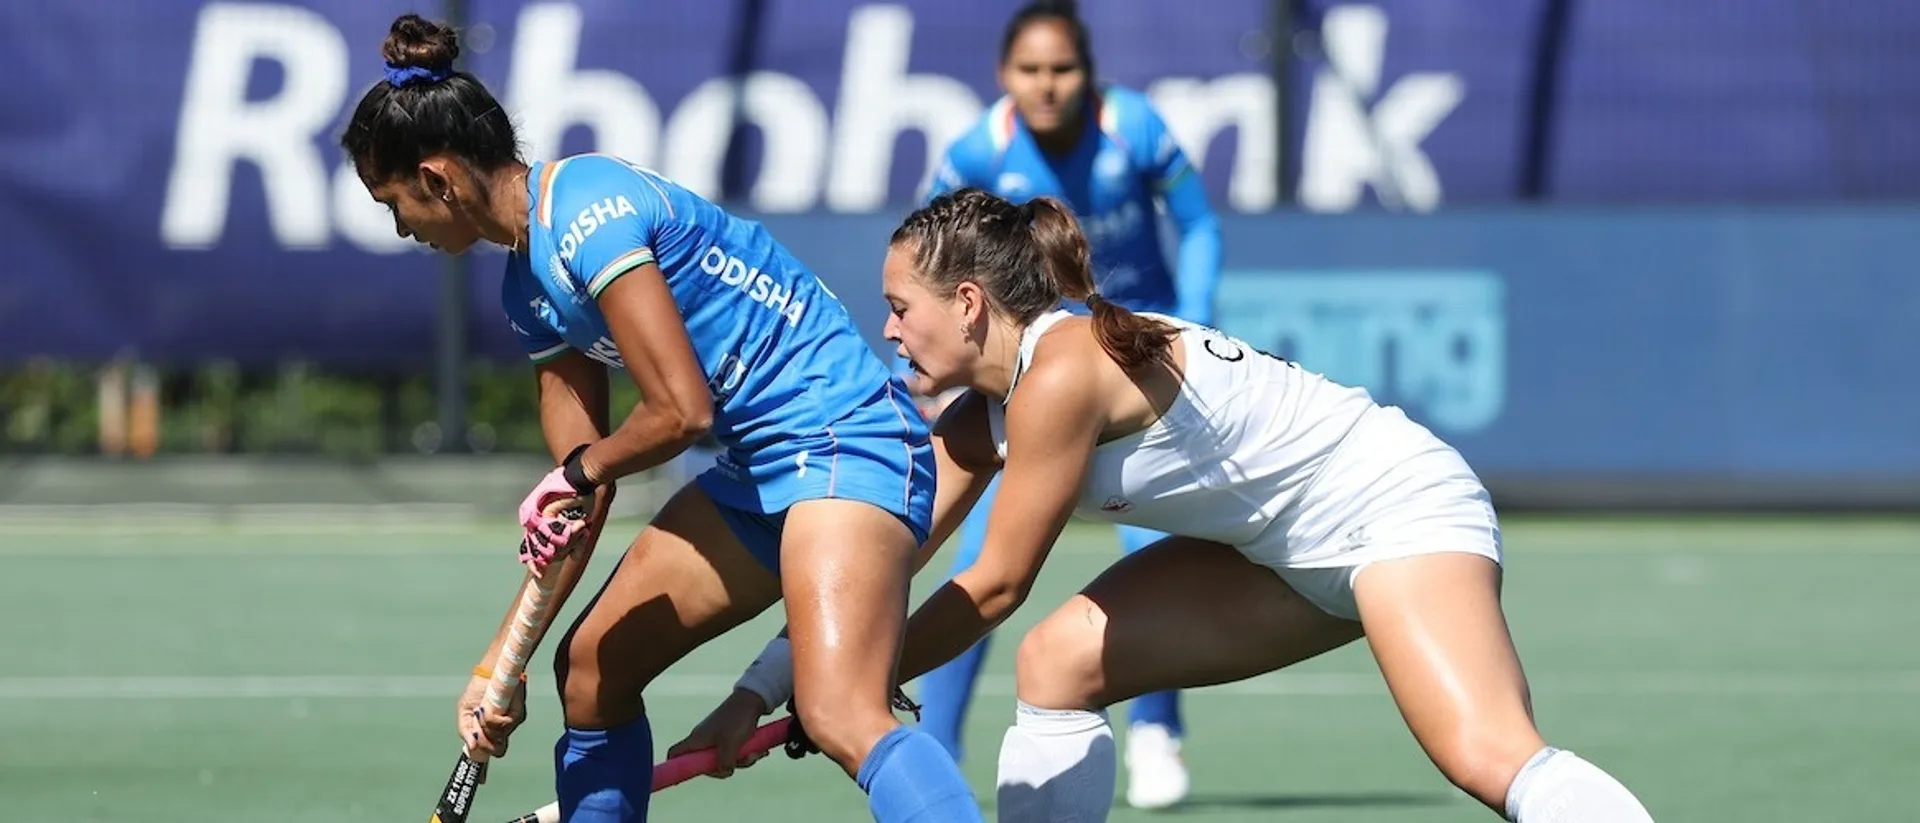 FIH Pro Hockey League | India women finish third after 4-0 win over USA, set eyes on World Cup